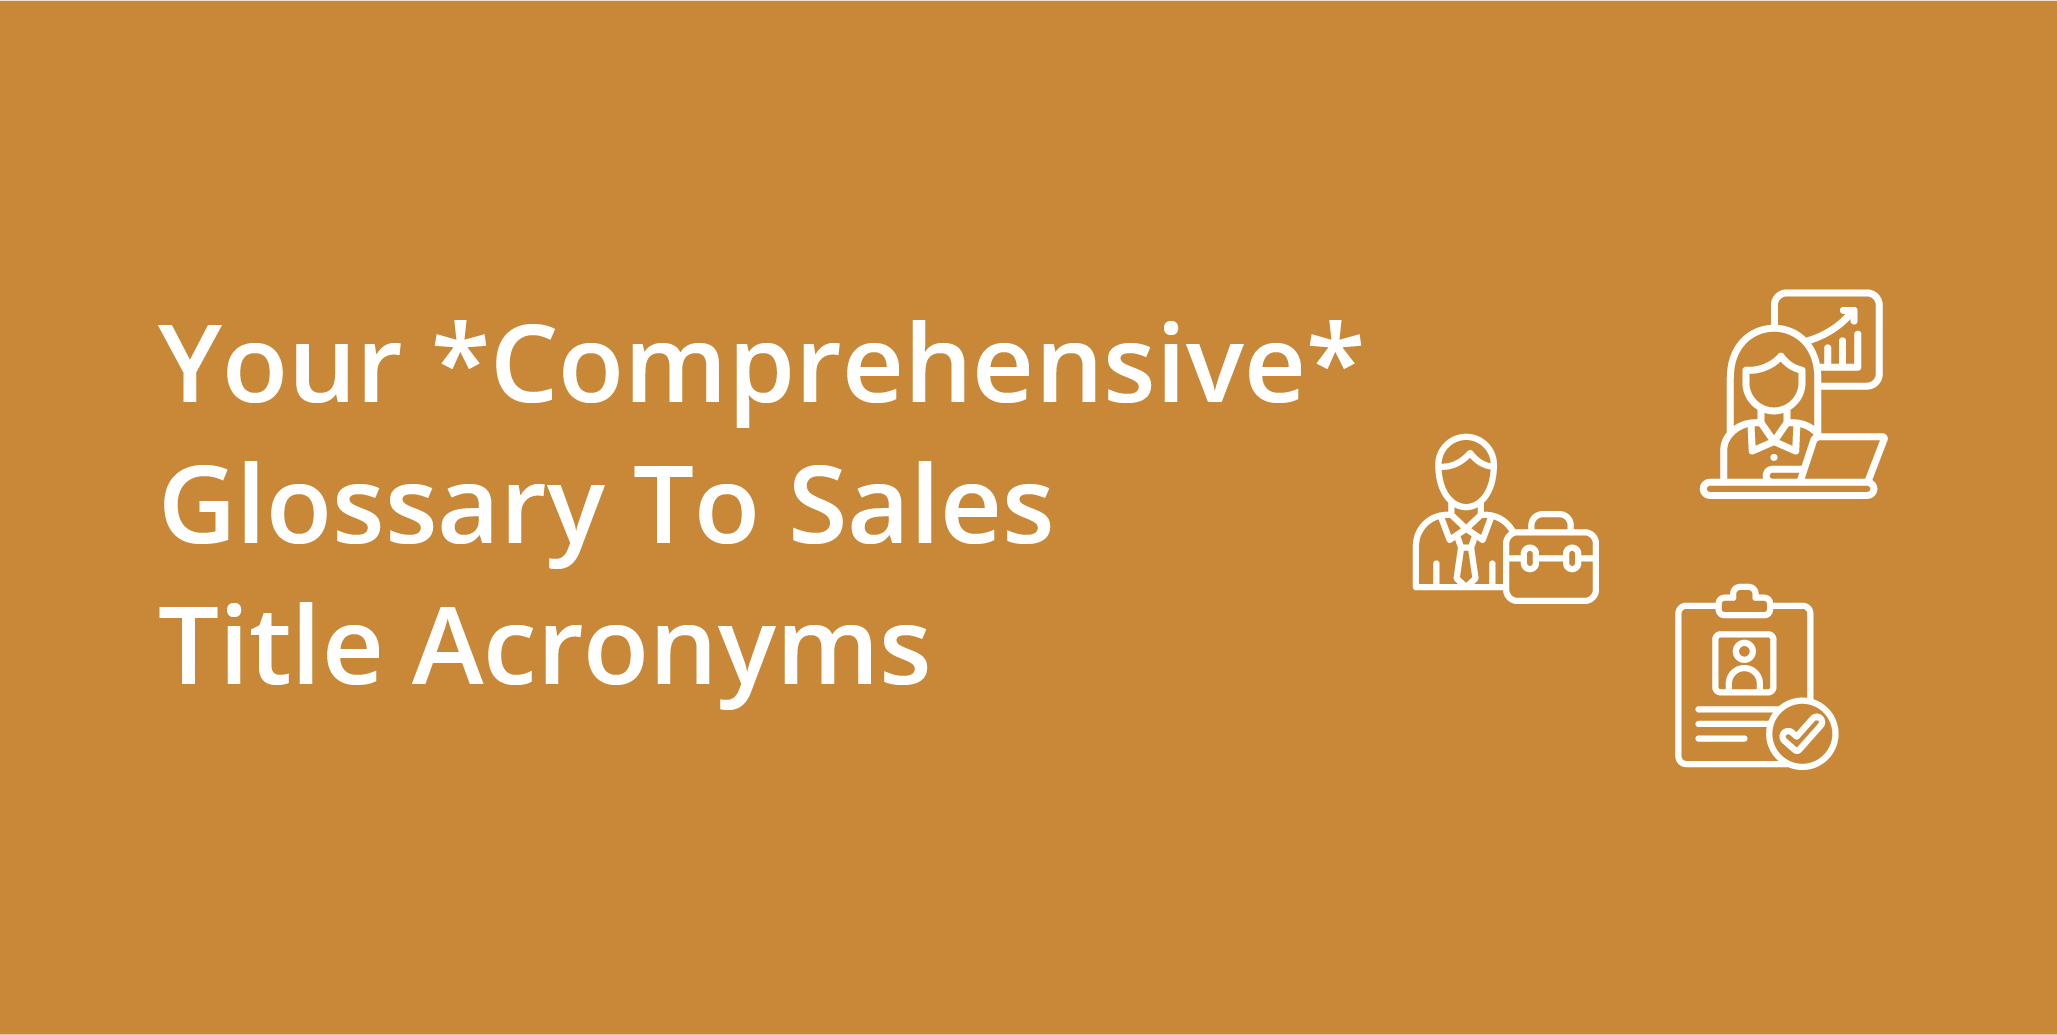 Your *Comprehensive* Glossary To Sales Title Acronyms | Telephones for business